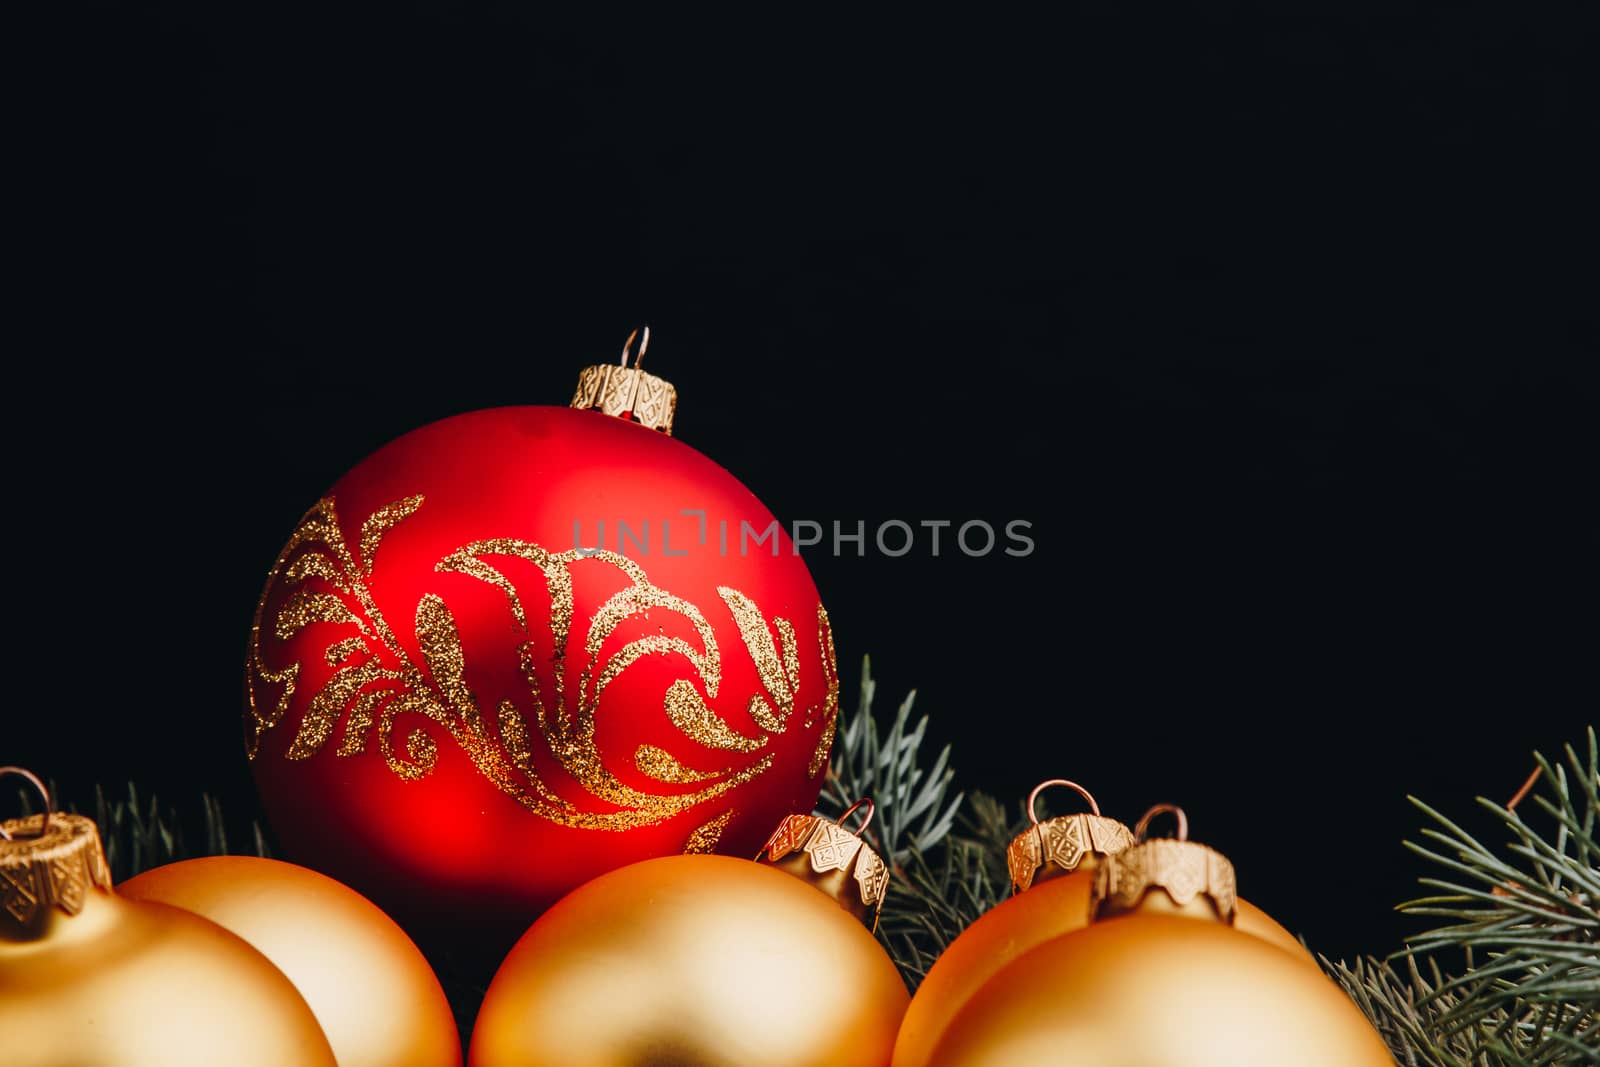 Christmas or New Year toy decorations golden balls and fur tree branch rustic on wooden background, top view, copy space by yulaphotographer